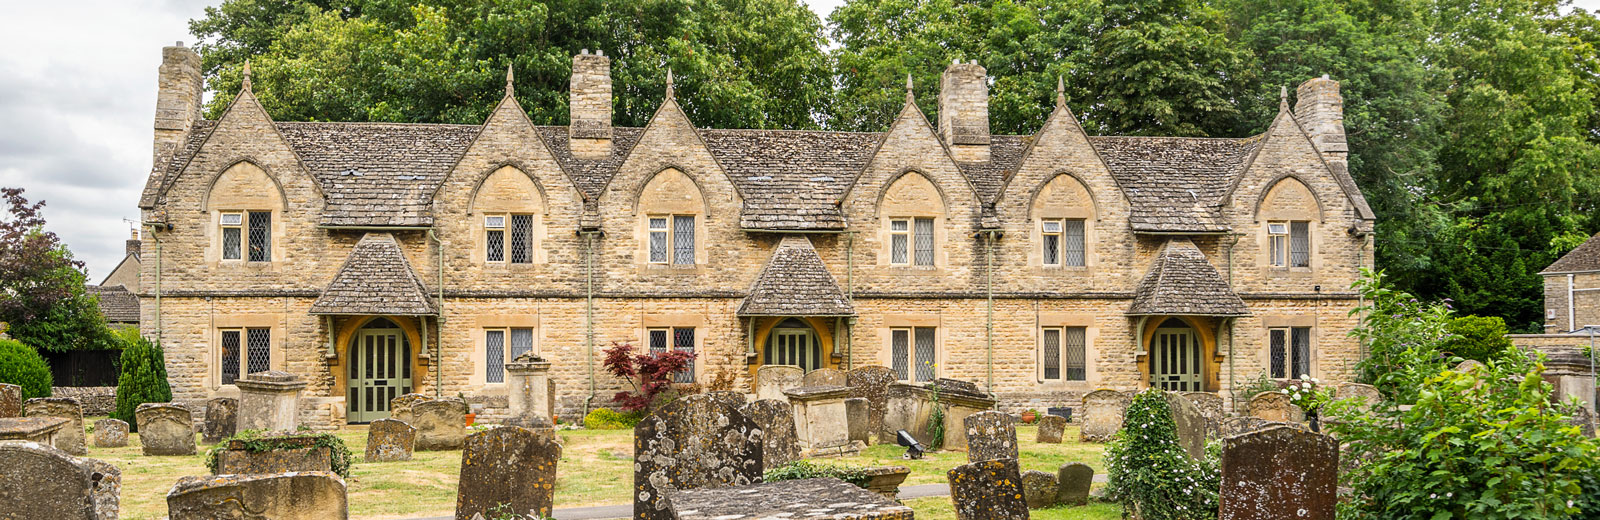 An almshouse in the Cotswolds